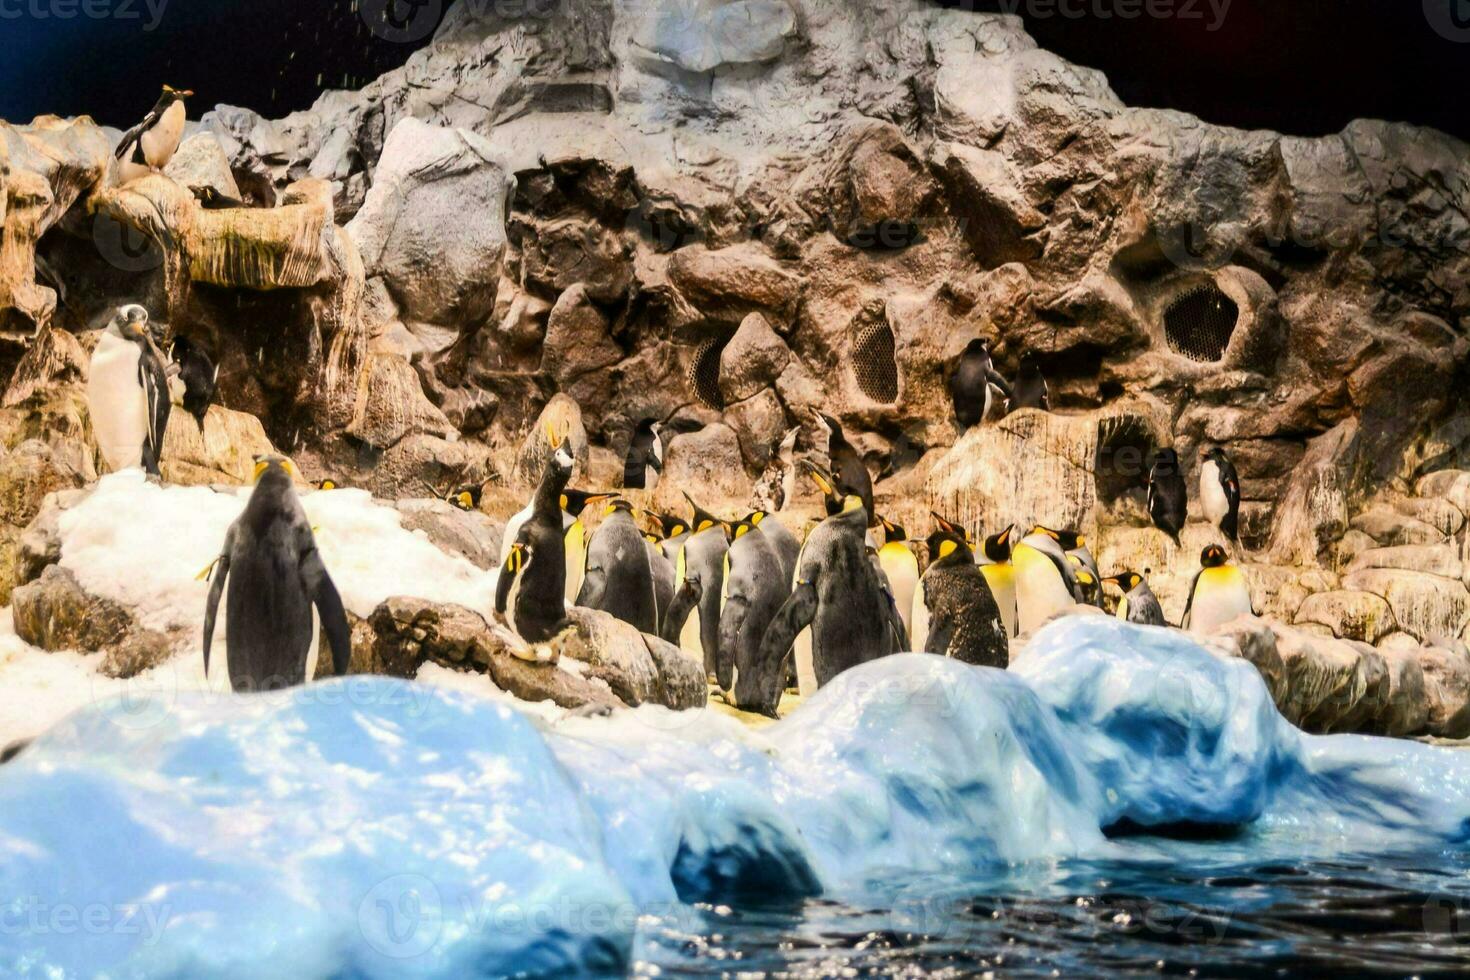 penguins in an aquarium with icebergs and rocks photo